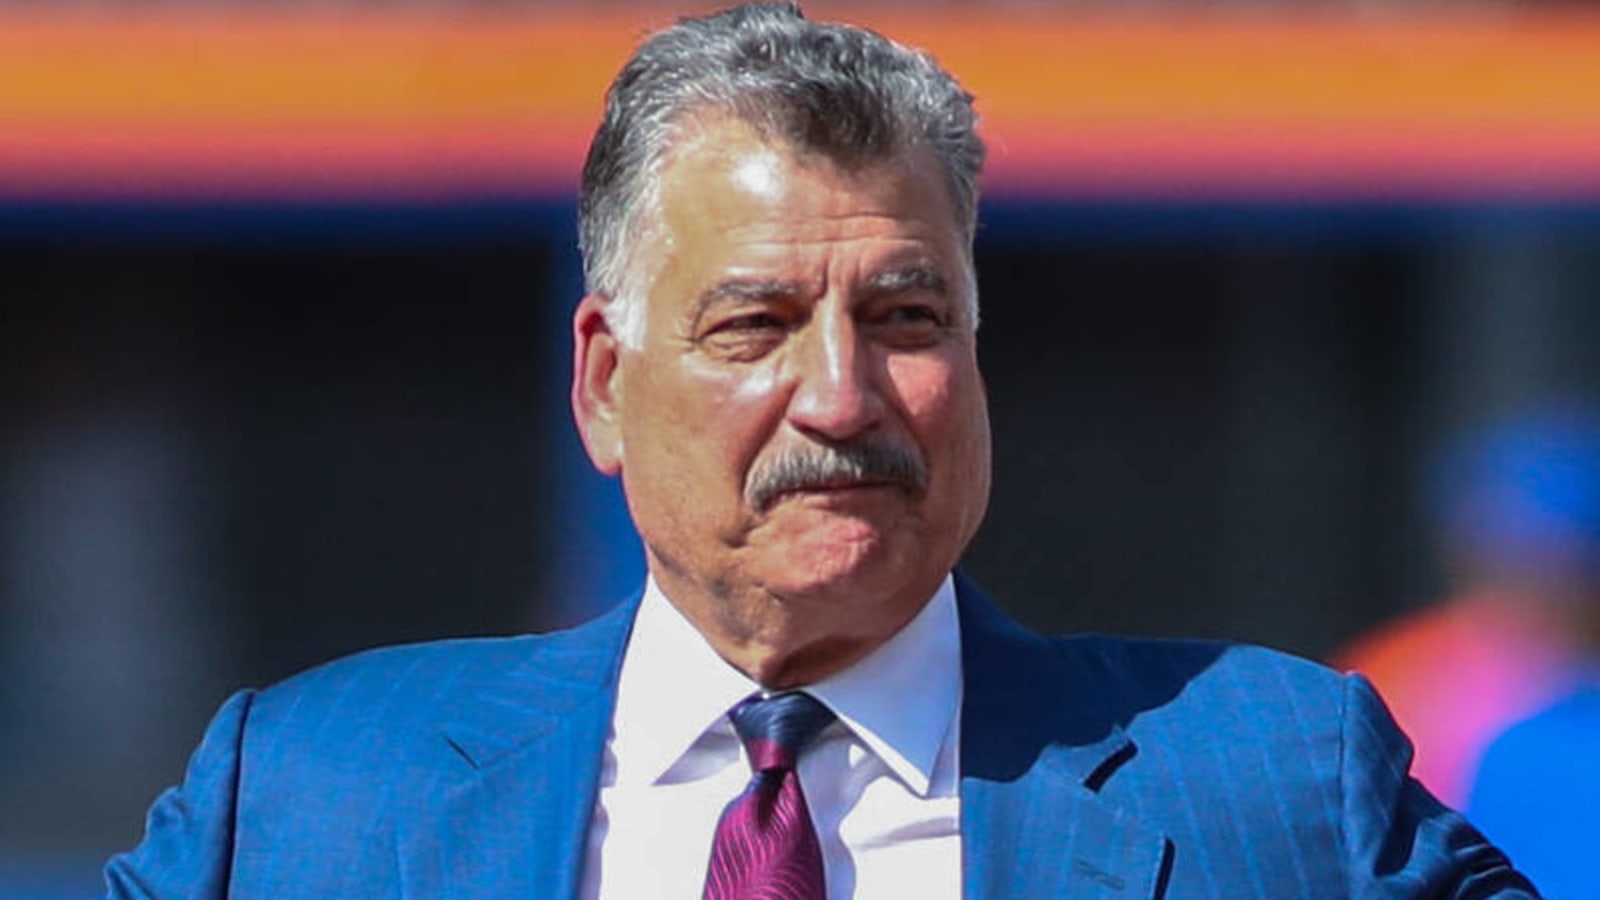 Mets legend Keith Hernandez complains baseball games are too 'lengthy'